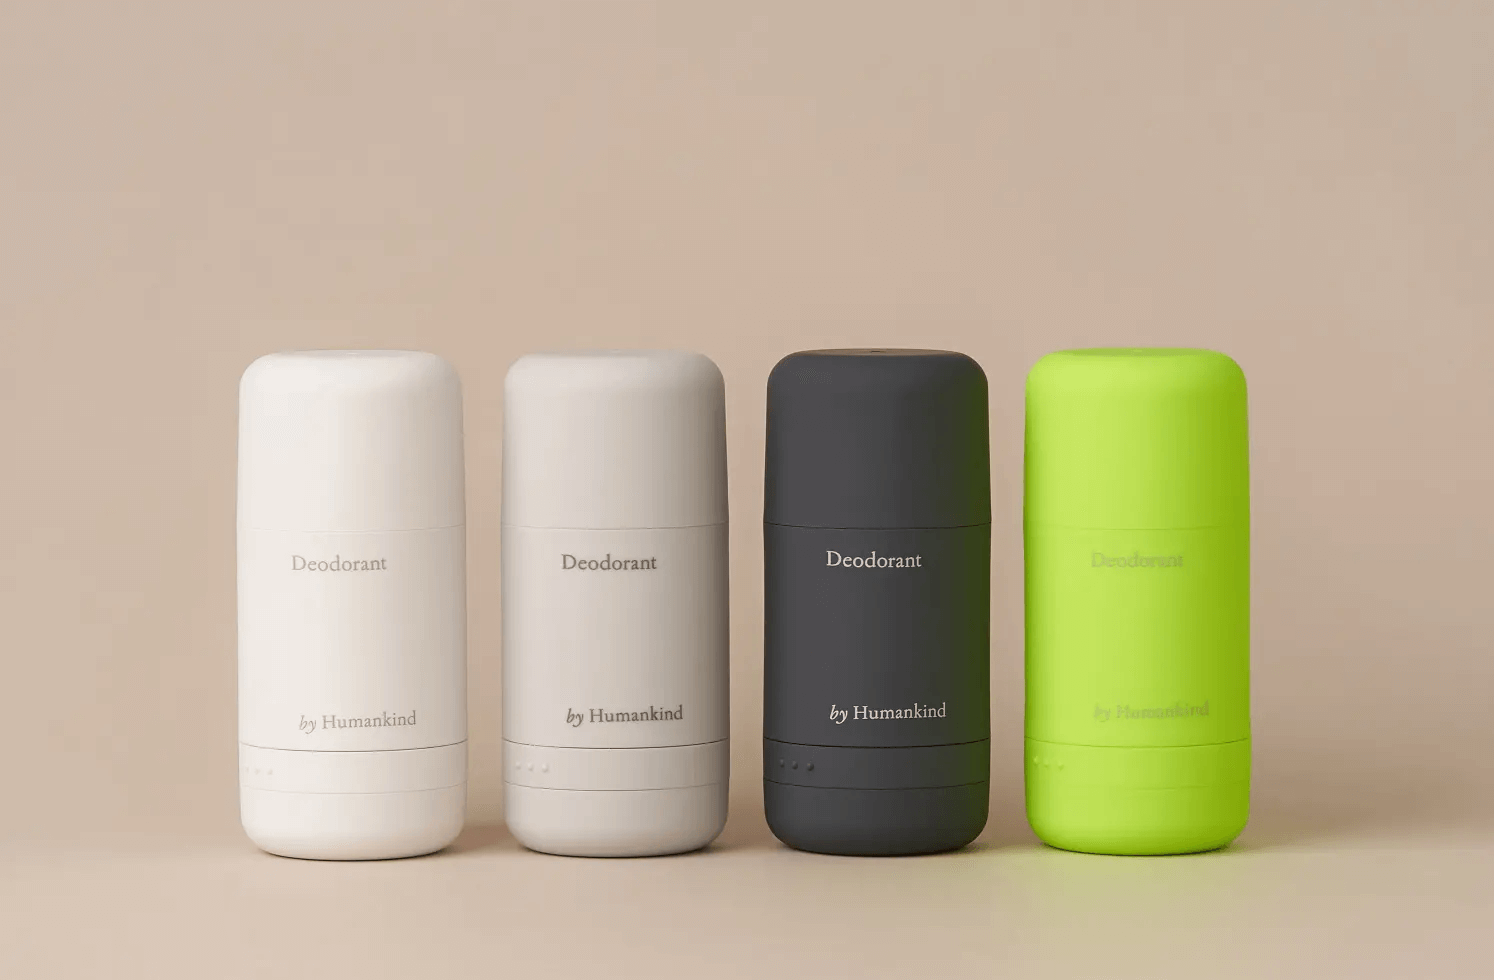 By Humankind clean deodorant